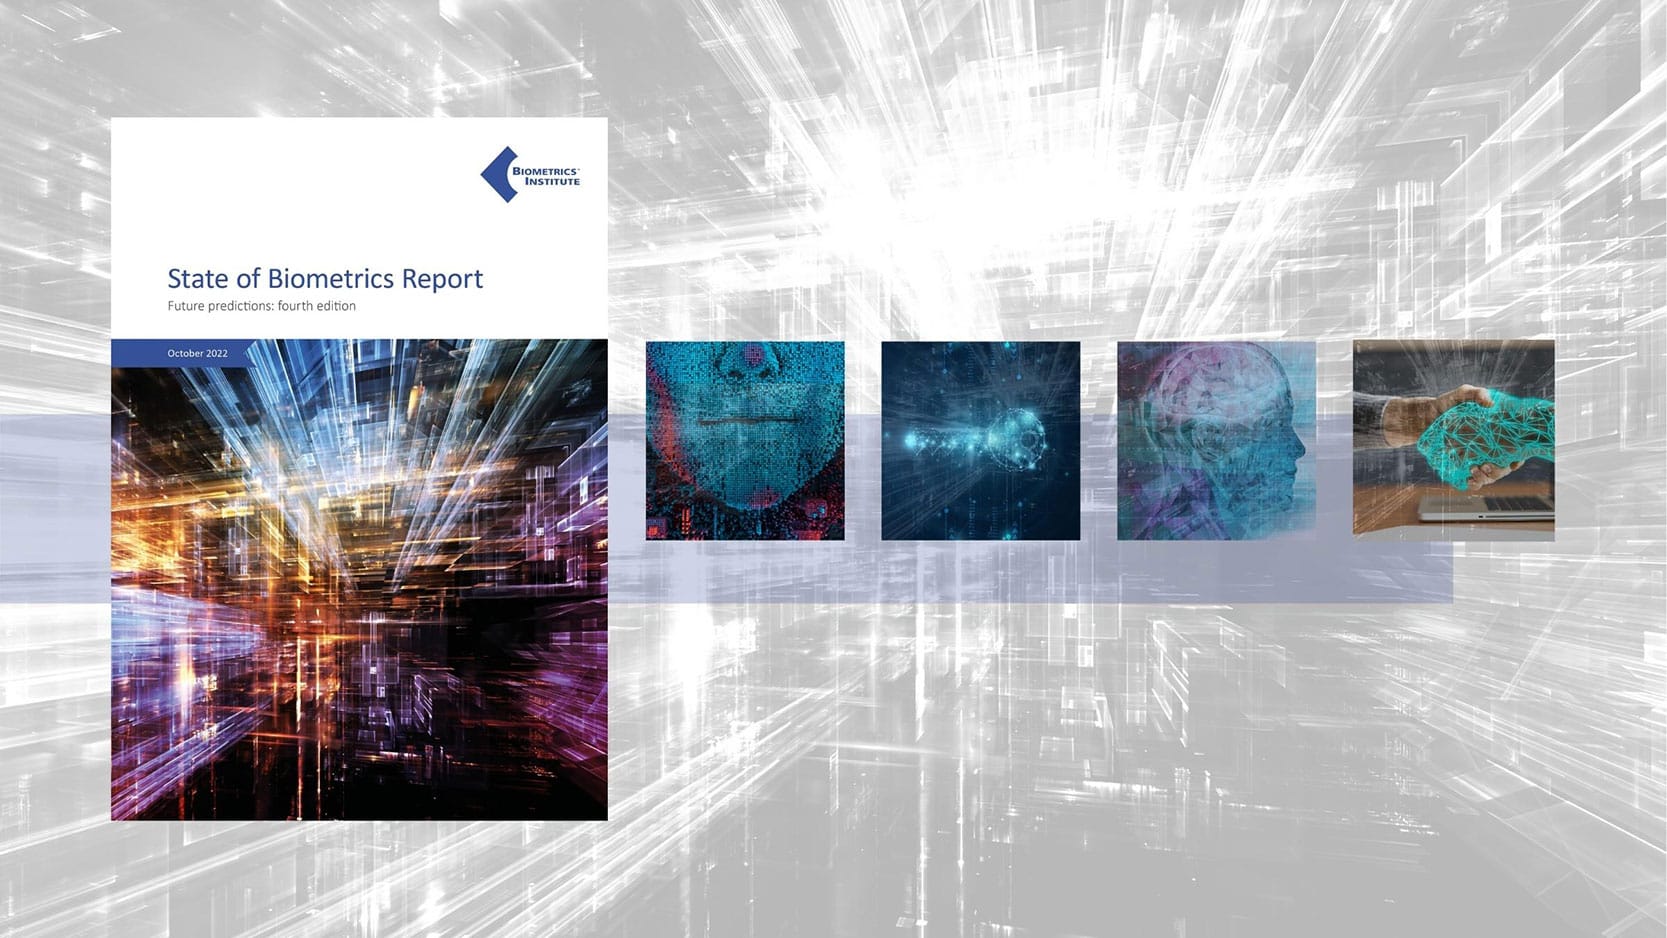 State of Biometrics Report front cover and four main themes